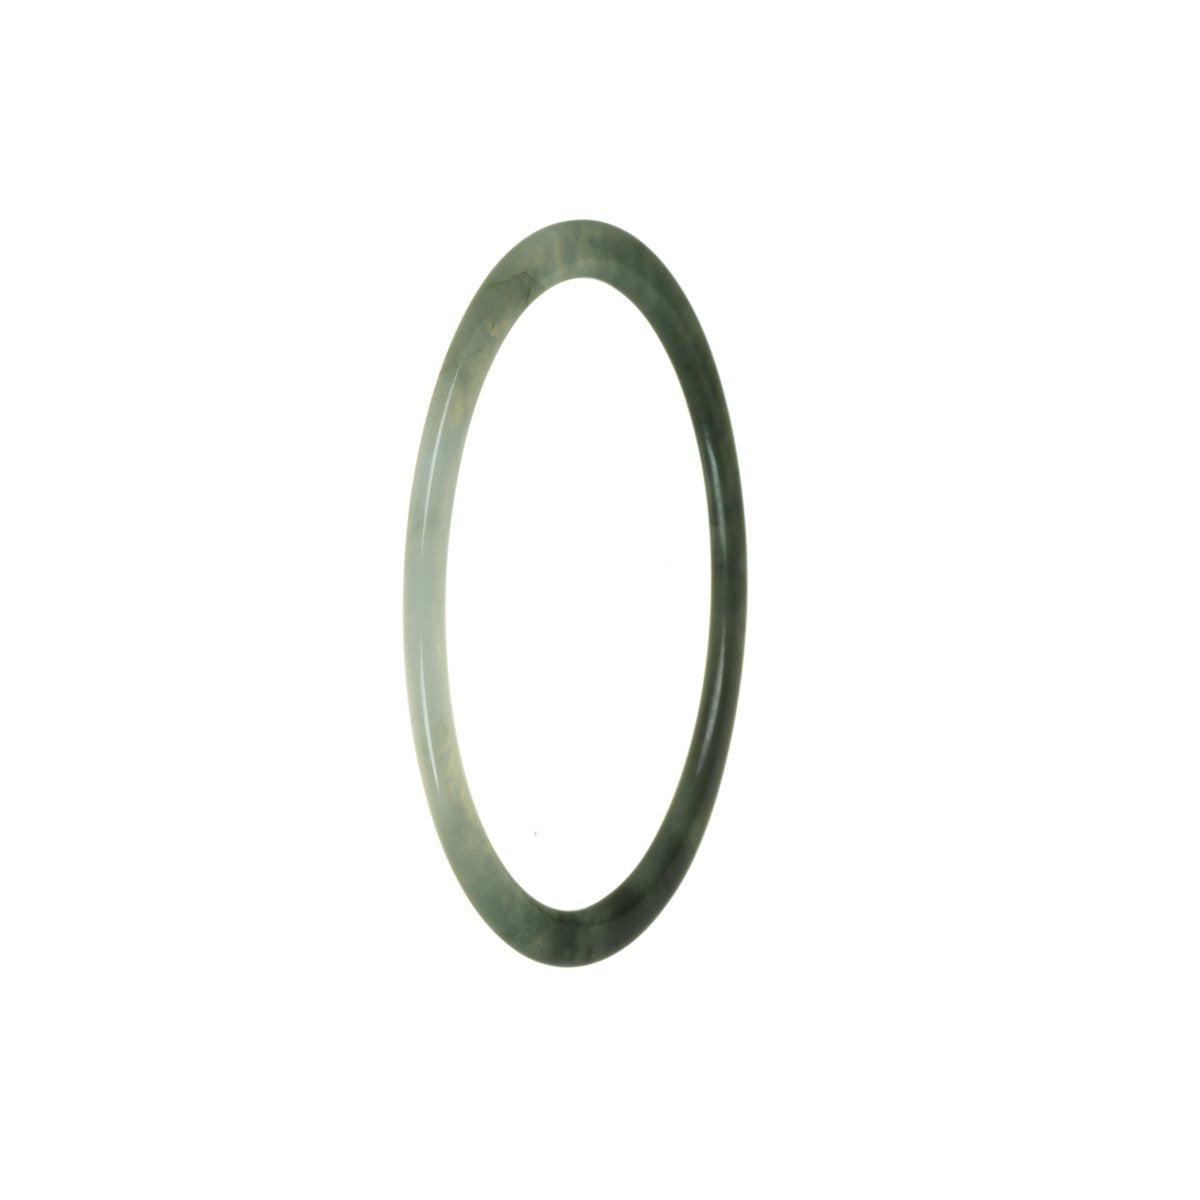 A thin, 60mm deep green and white jadeite jade bangle, showcasing an authentic Type A jade.